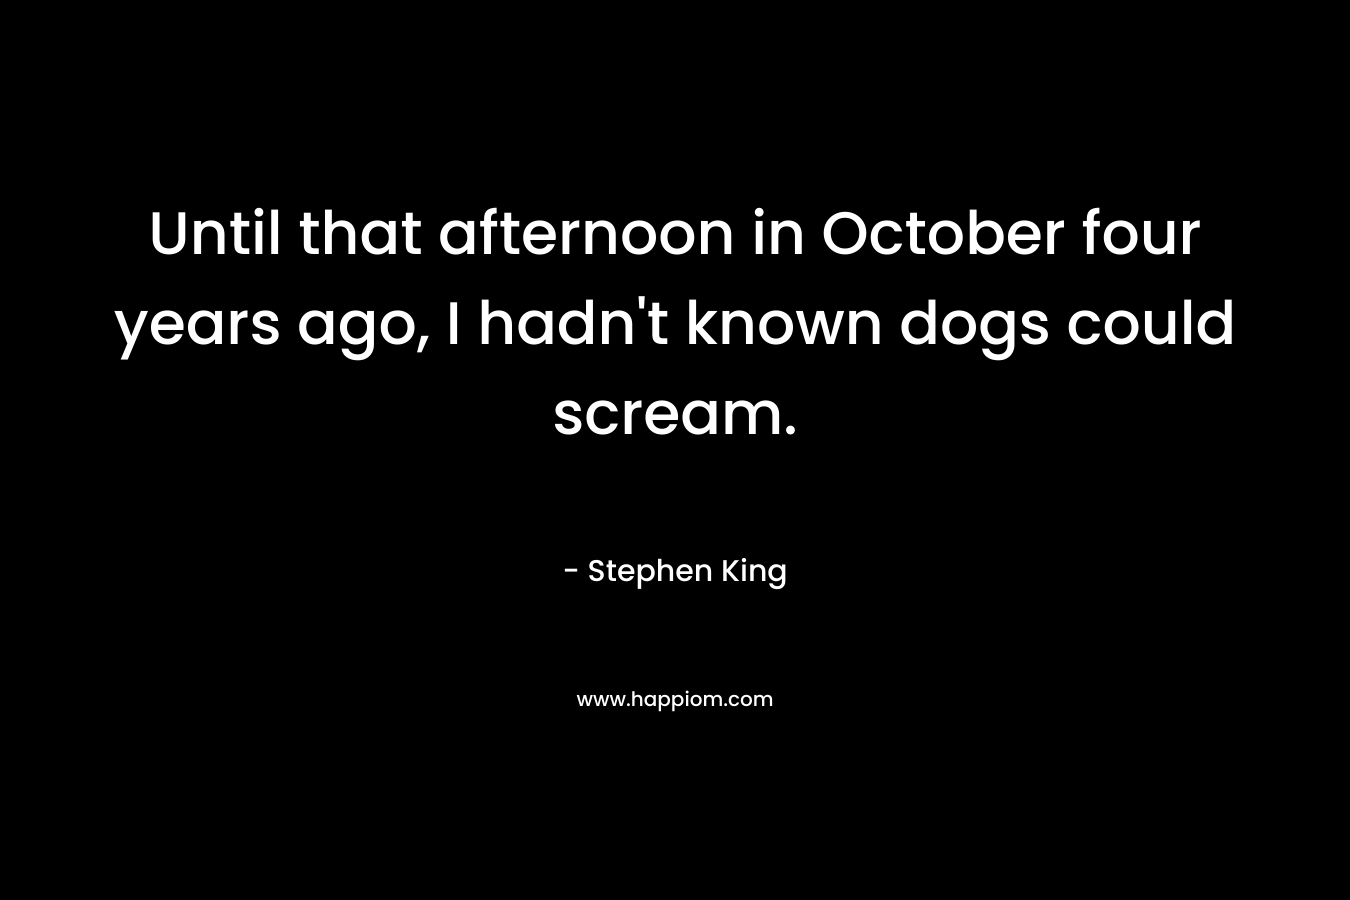 Until that afternoon in October four years ago, I hadn't known dogs could scream.